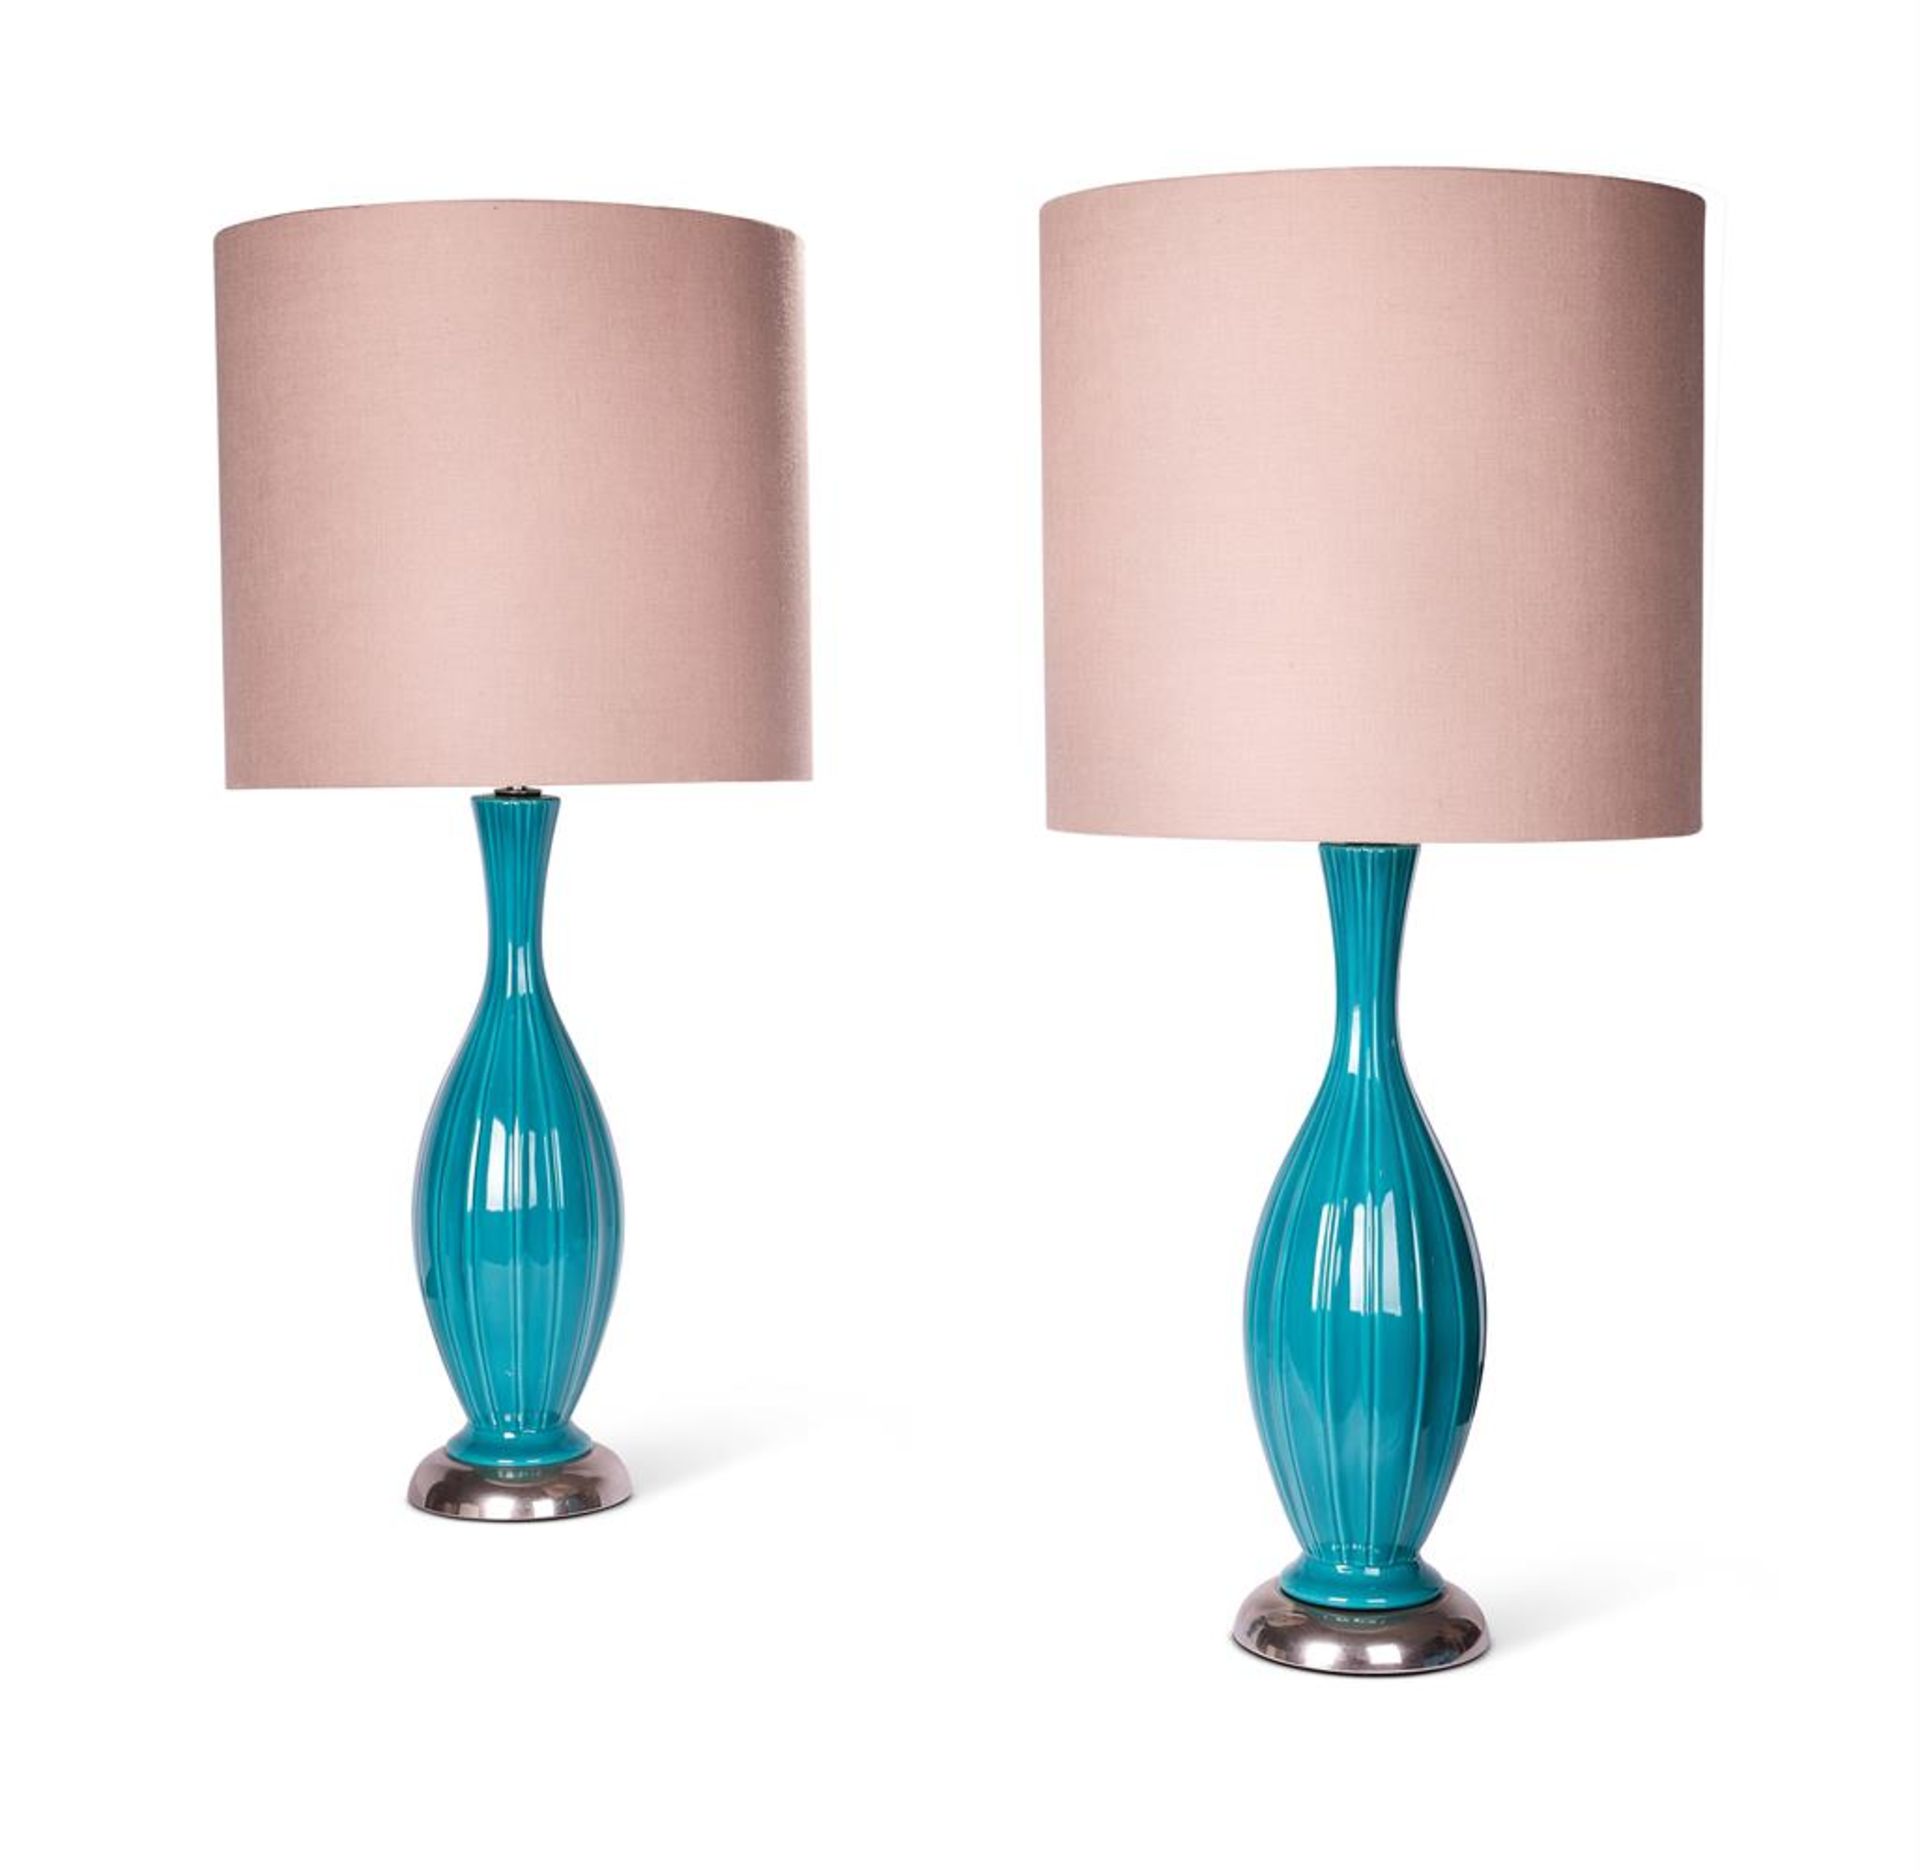 A PAIR OF TURQUOISE RIBBED CERAMIC LAMPS, MID 20TH CENTURY